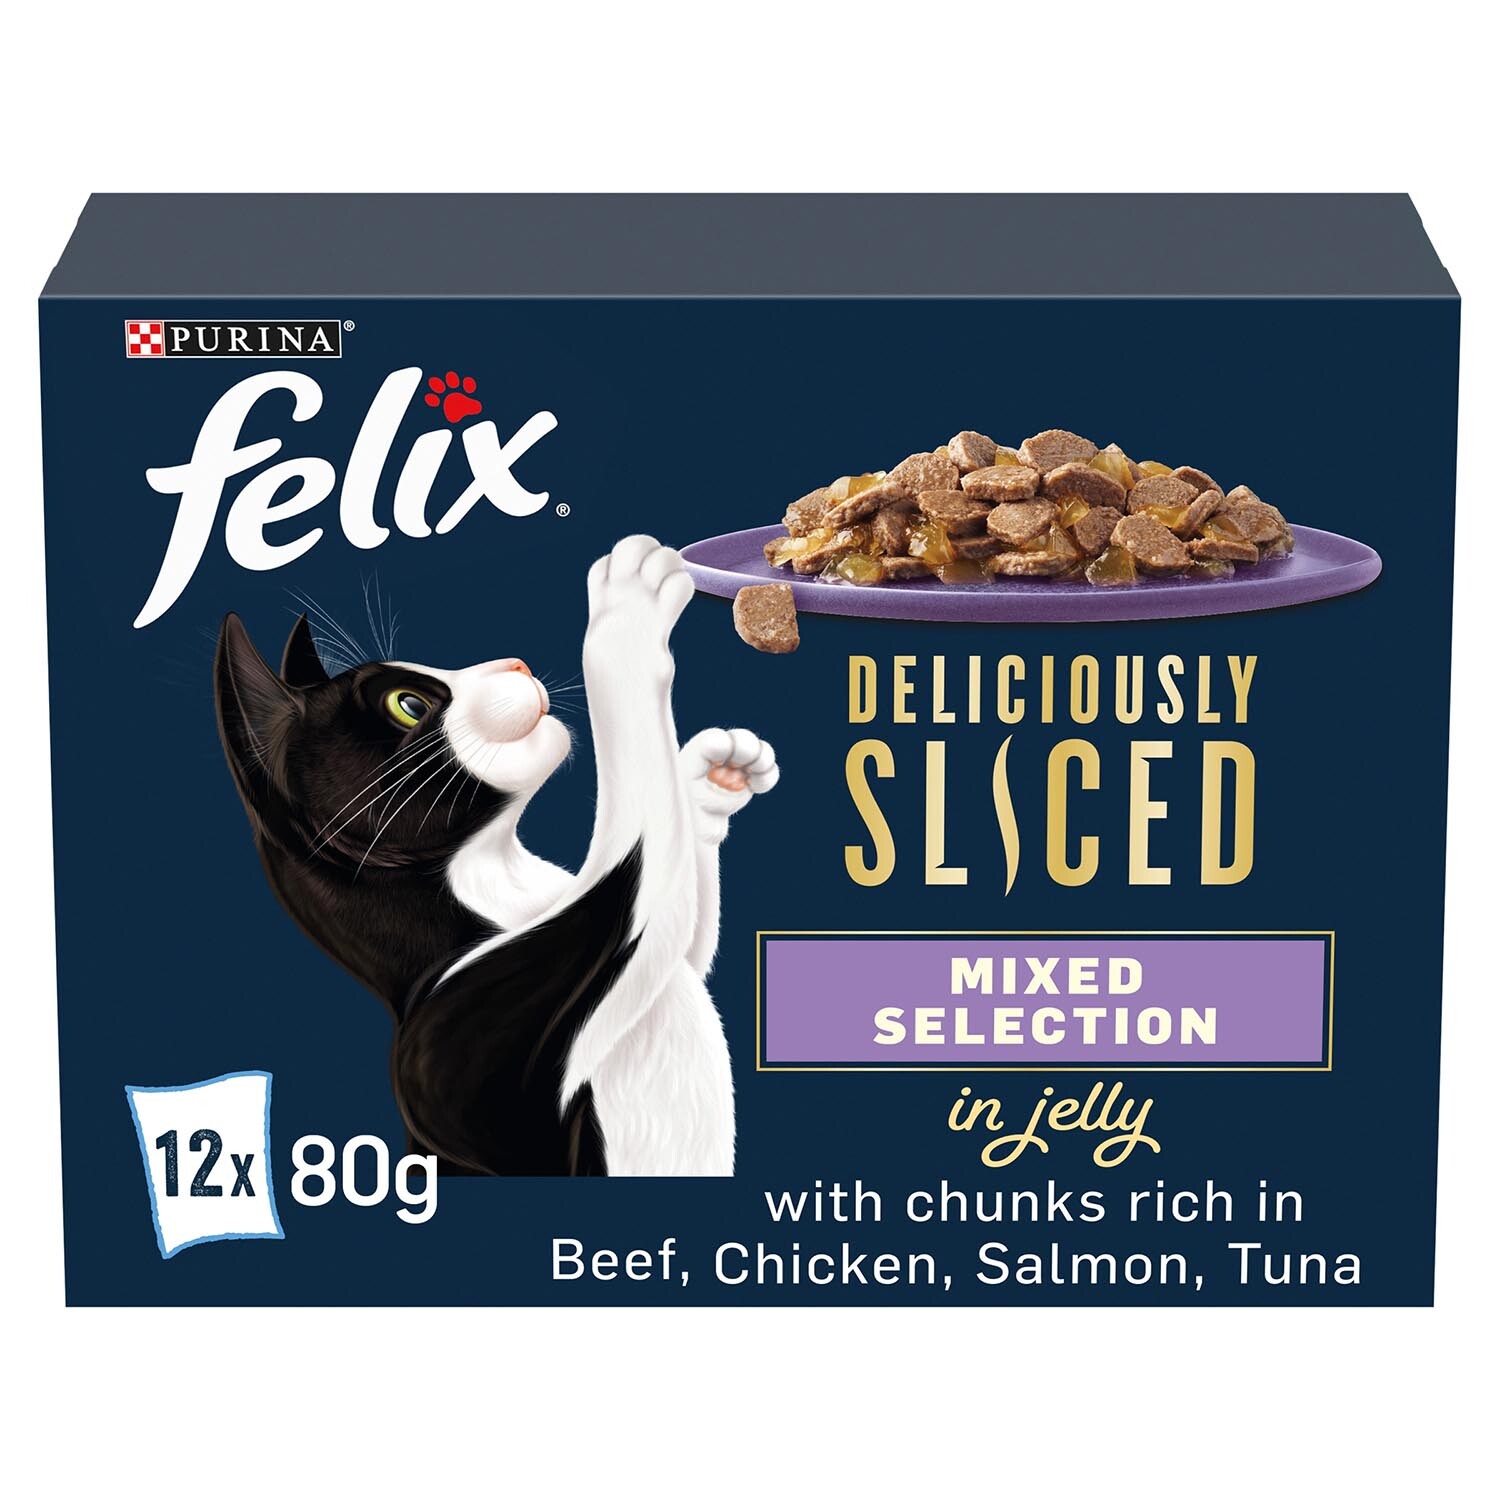 Purina Felix Deliciously Sliced Fish in Jelly Cat Food 80g 12 Pack Image